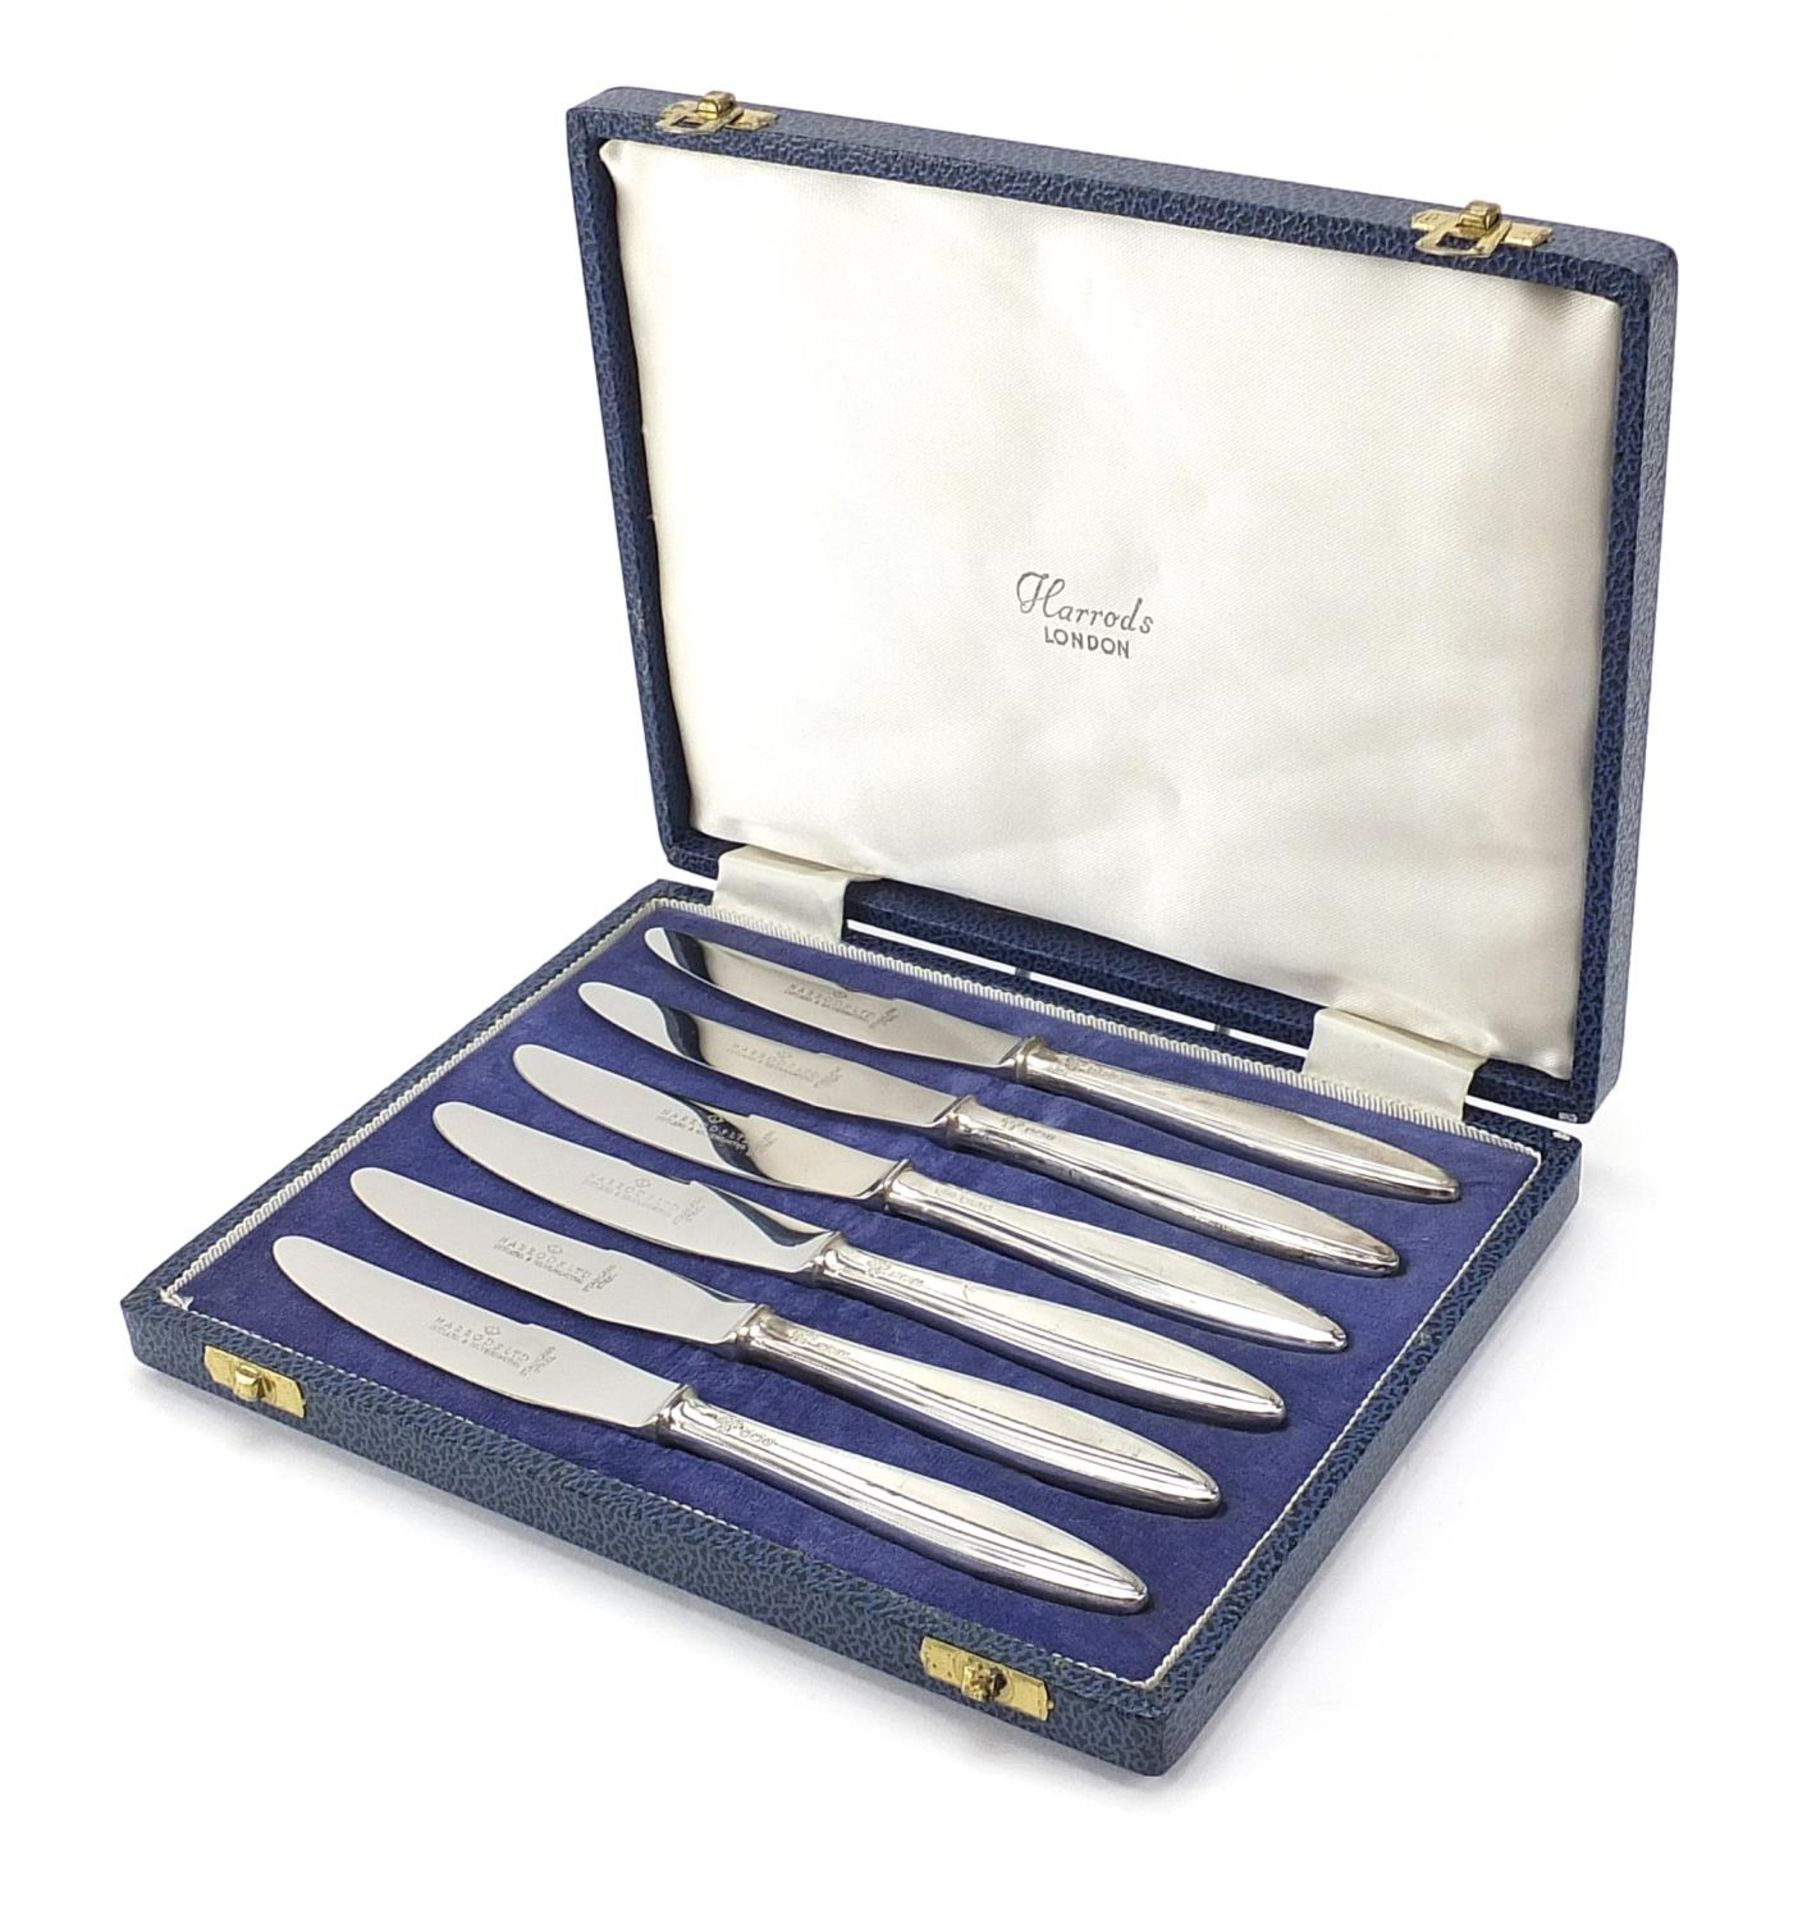 Harrods Ltd Cutlers and Silversmiths, set of six silver handled knives with stainless steel blades